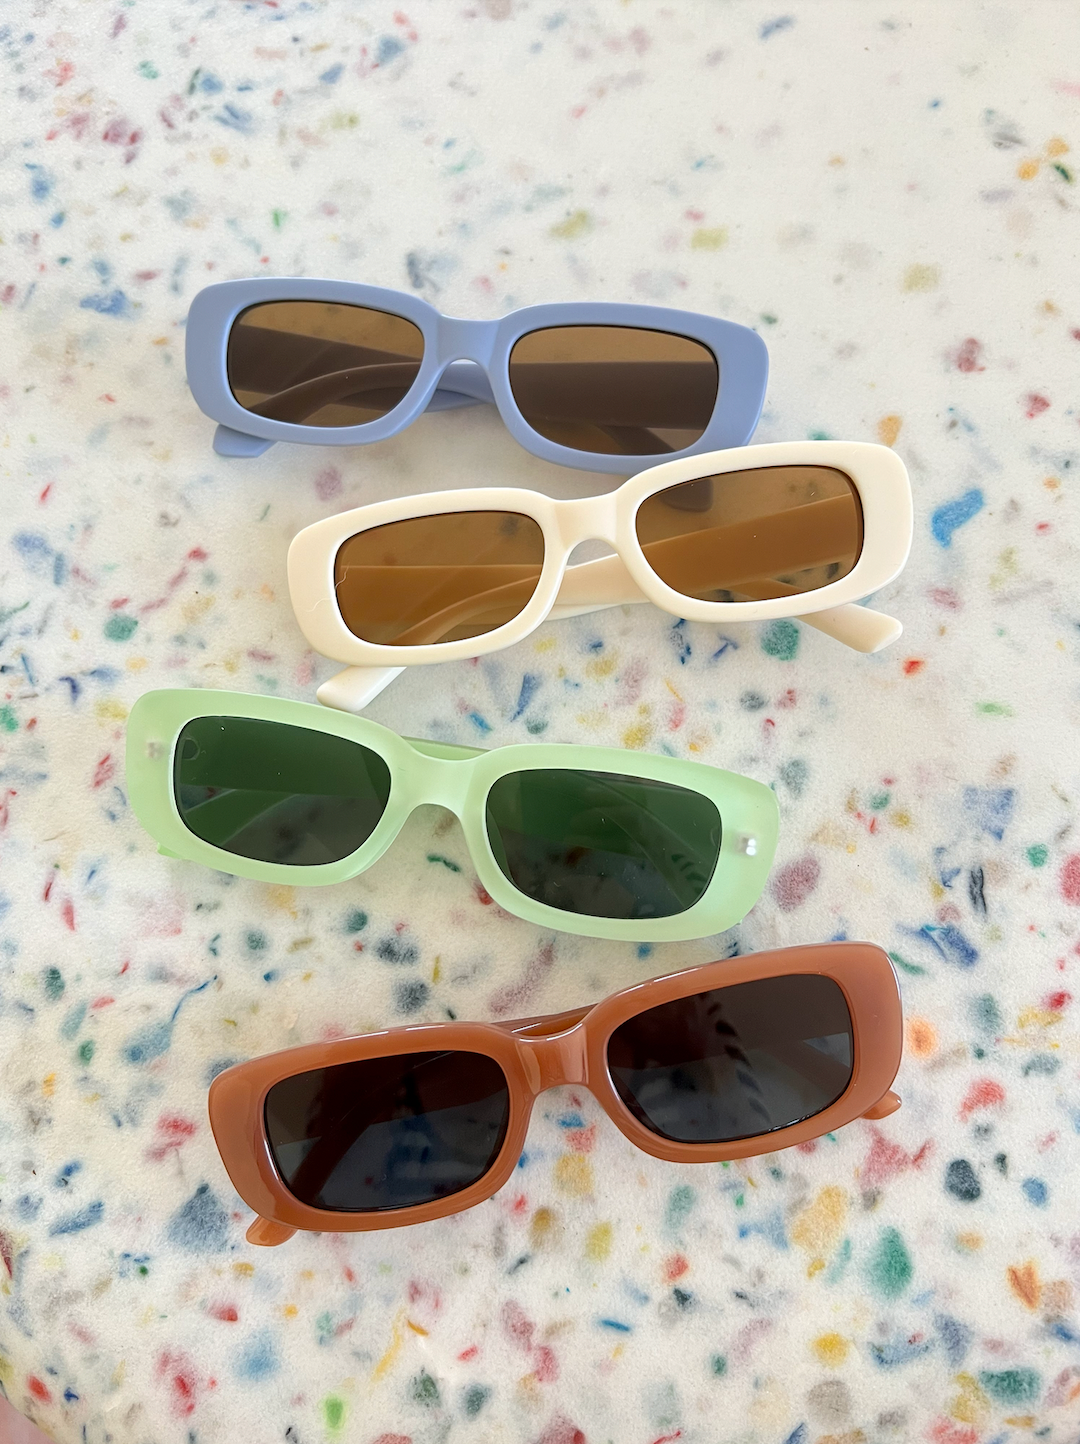 Four pairs of kids' sunglasses: blue frames with brown lenses, cream frames with brown lenses, mint green frames with green lenses, orange frames with blue lenses